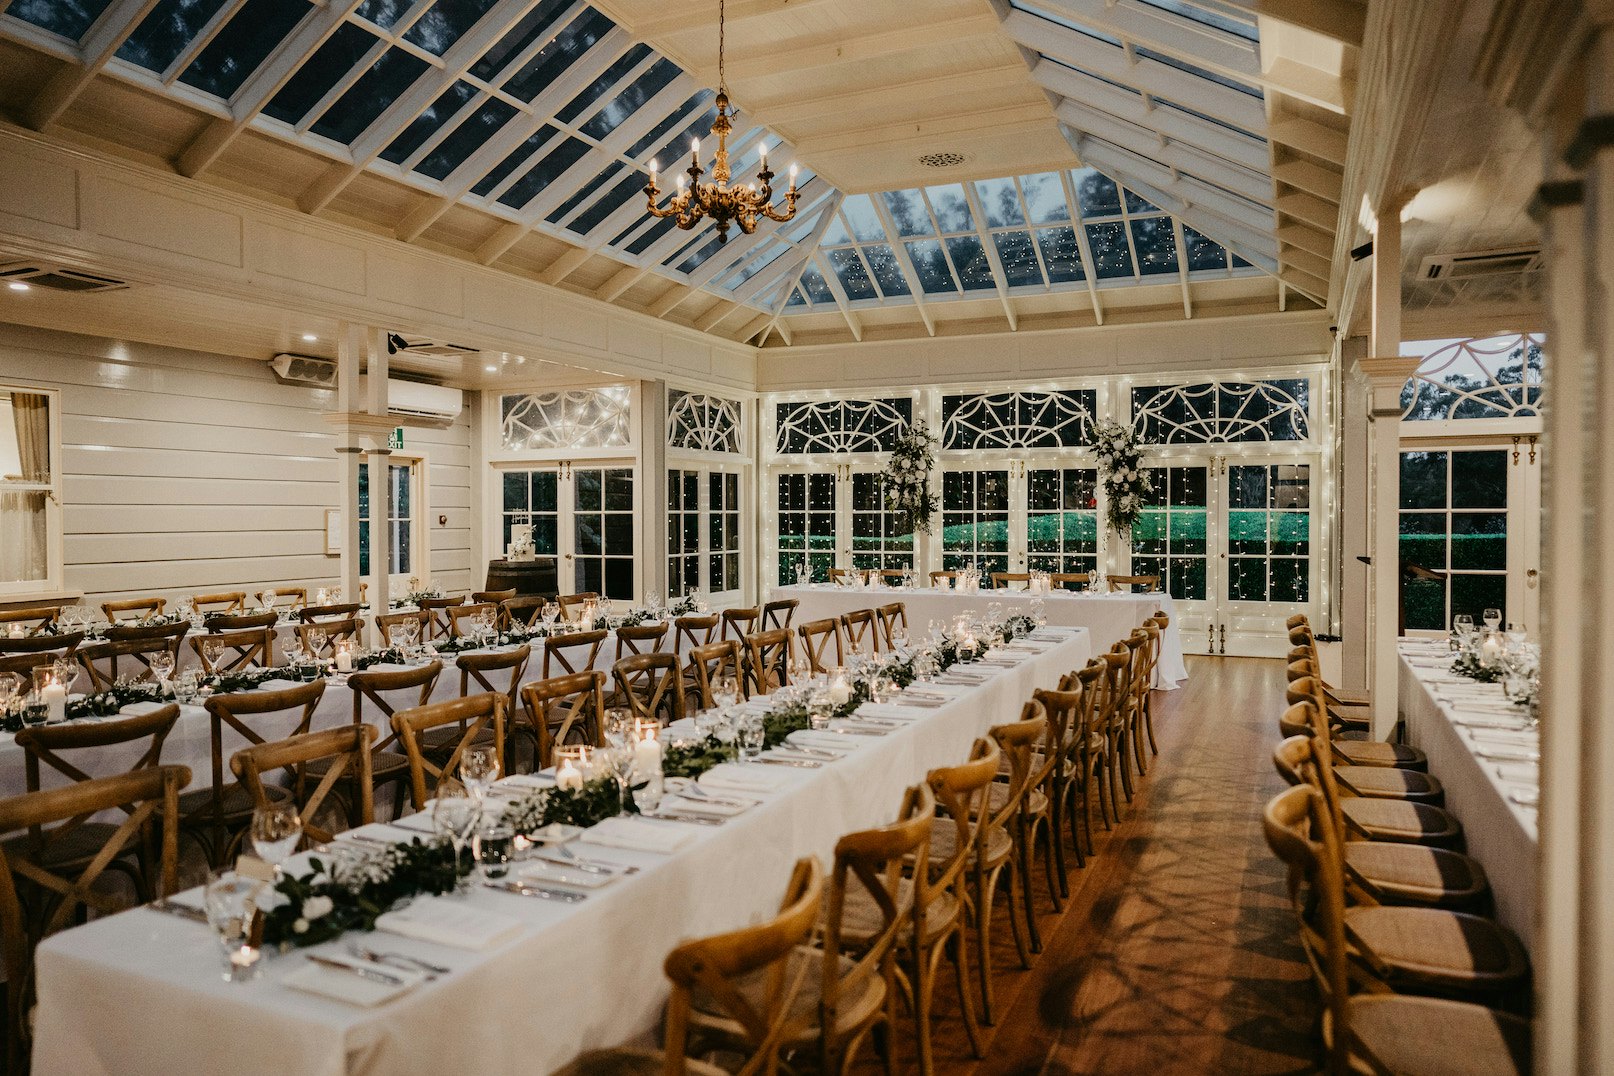 Wedding reception with wooden chairs